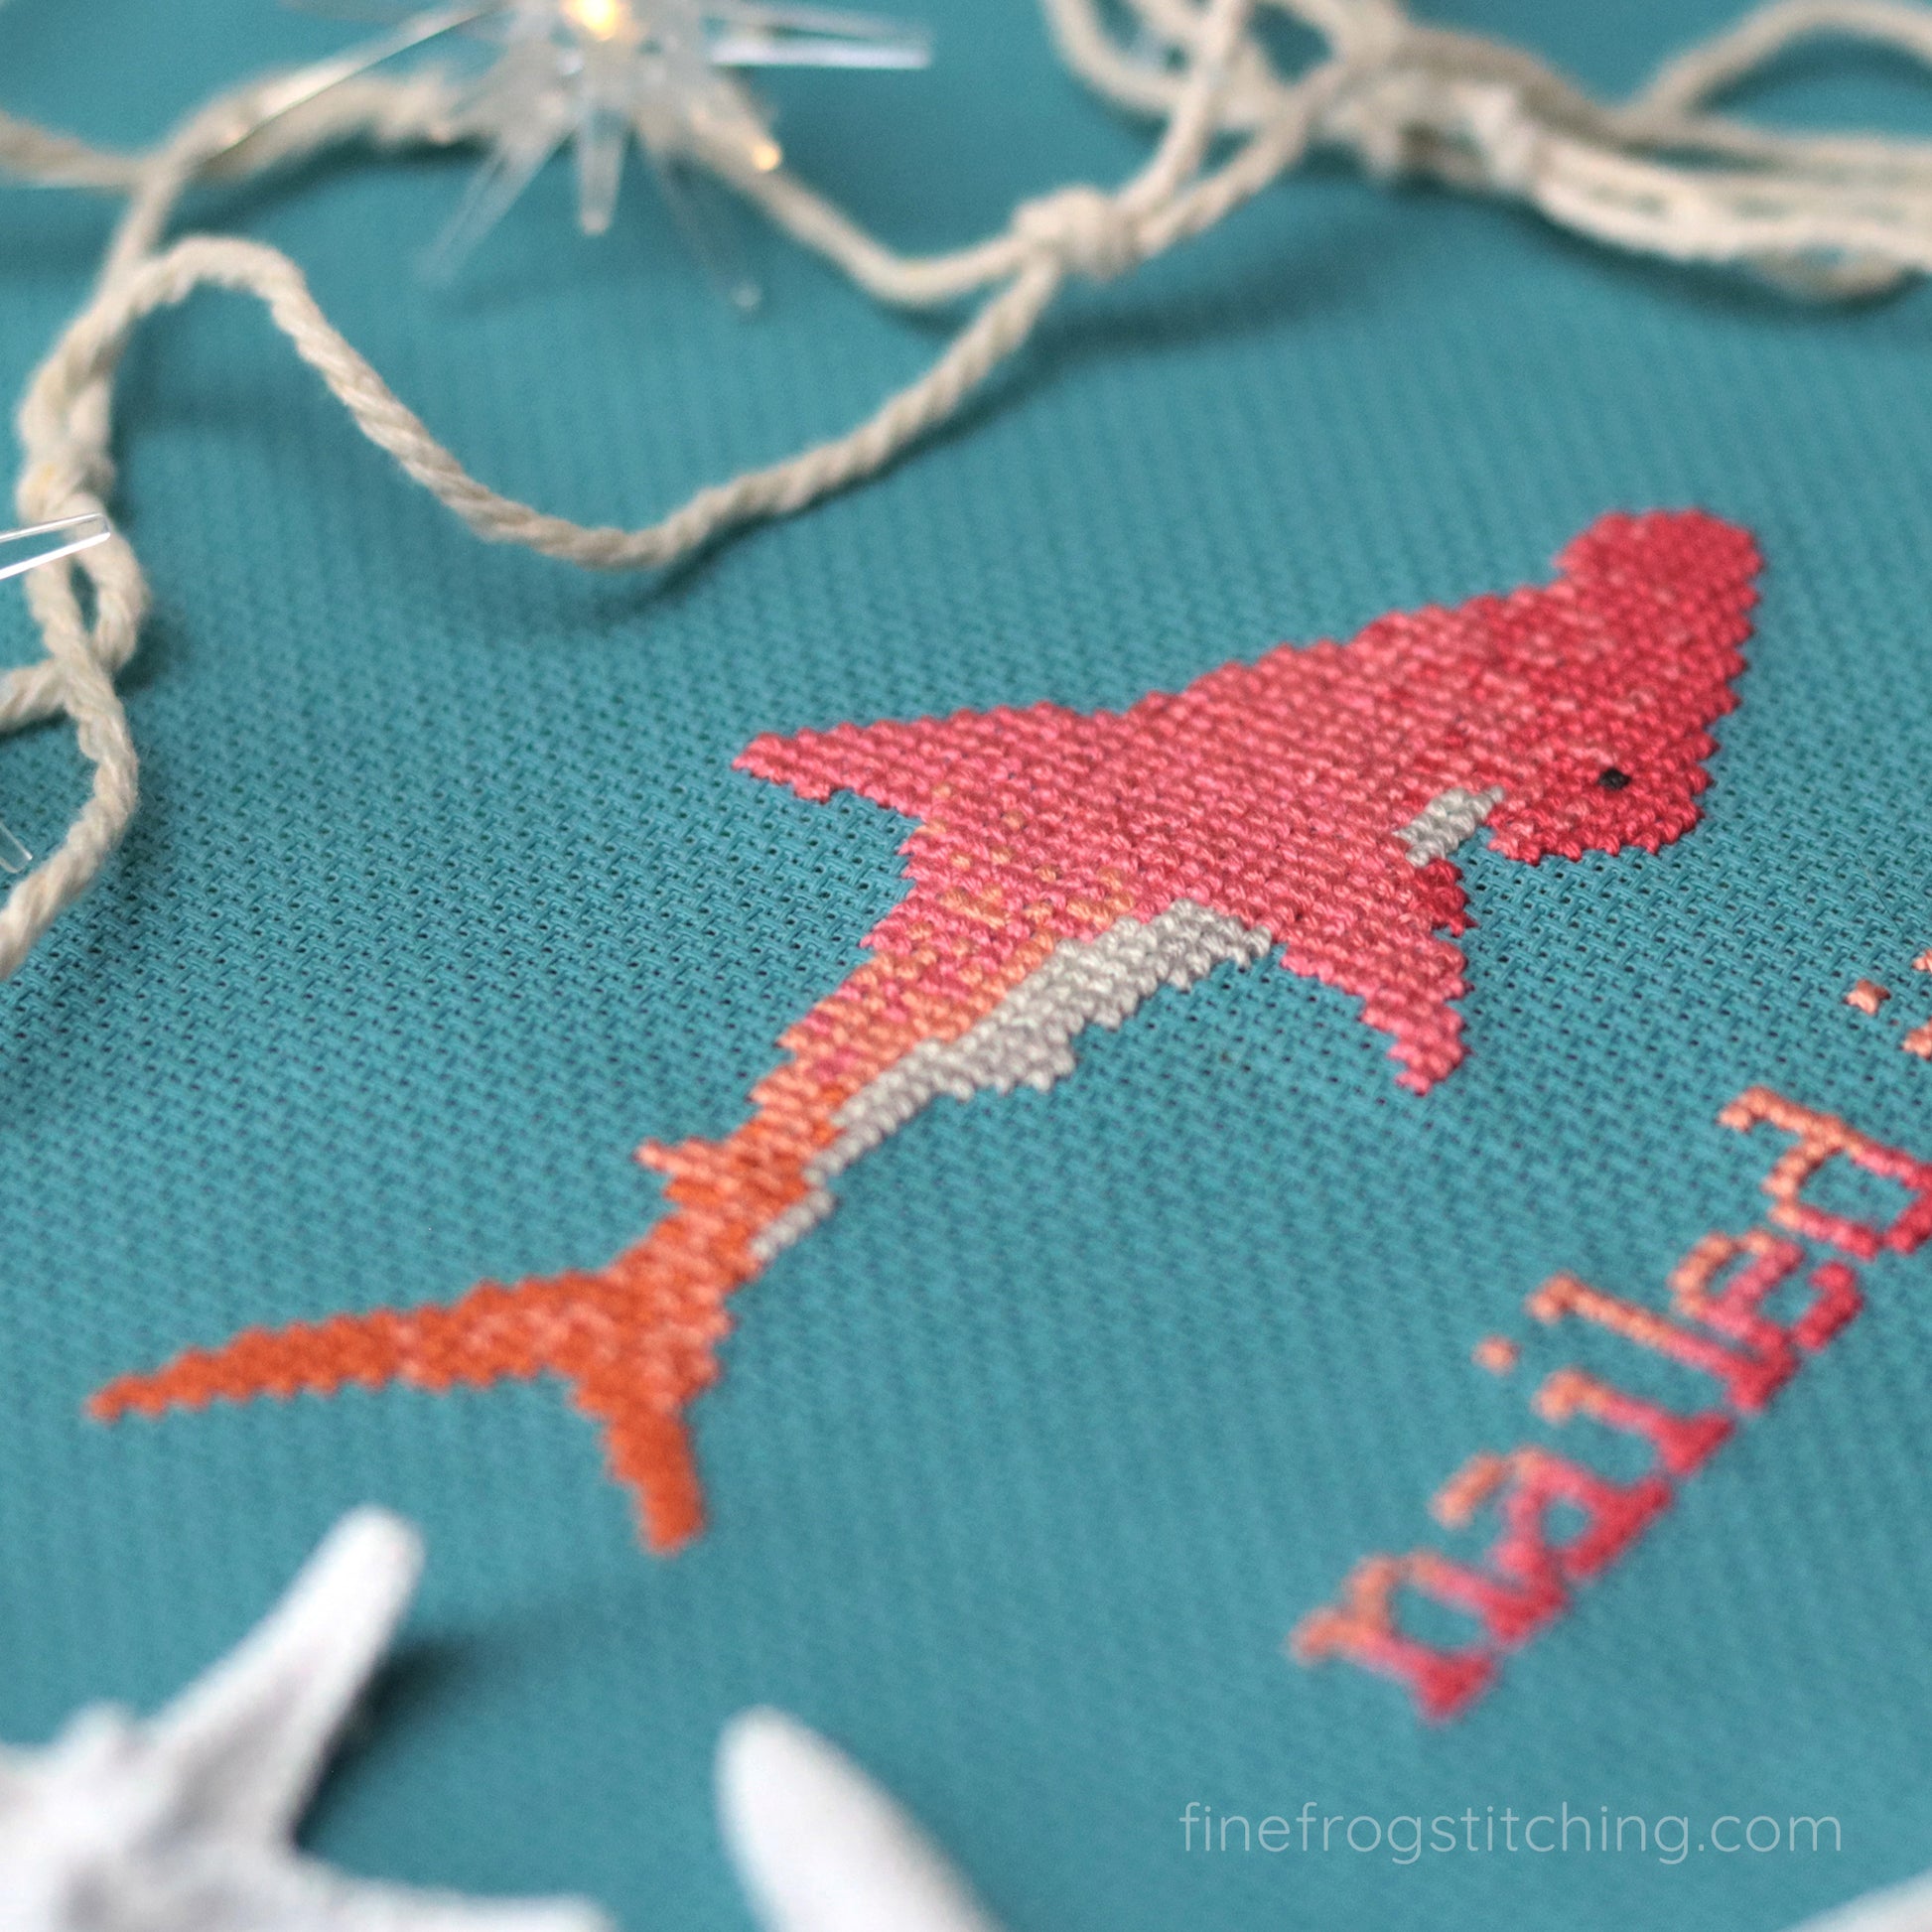 Funny Shark Cross Stitch Pattern PDF Snarky Ocean Whale Hammerhead Shark Nailed It Stitched Detail 2